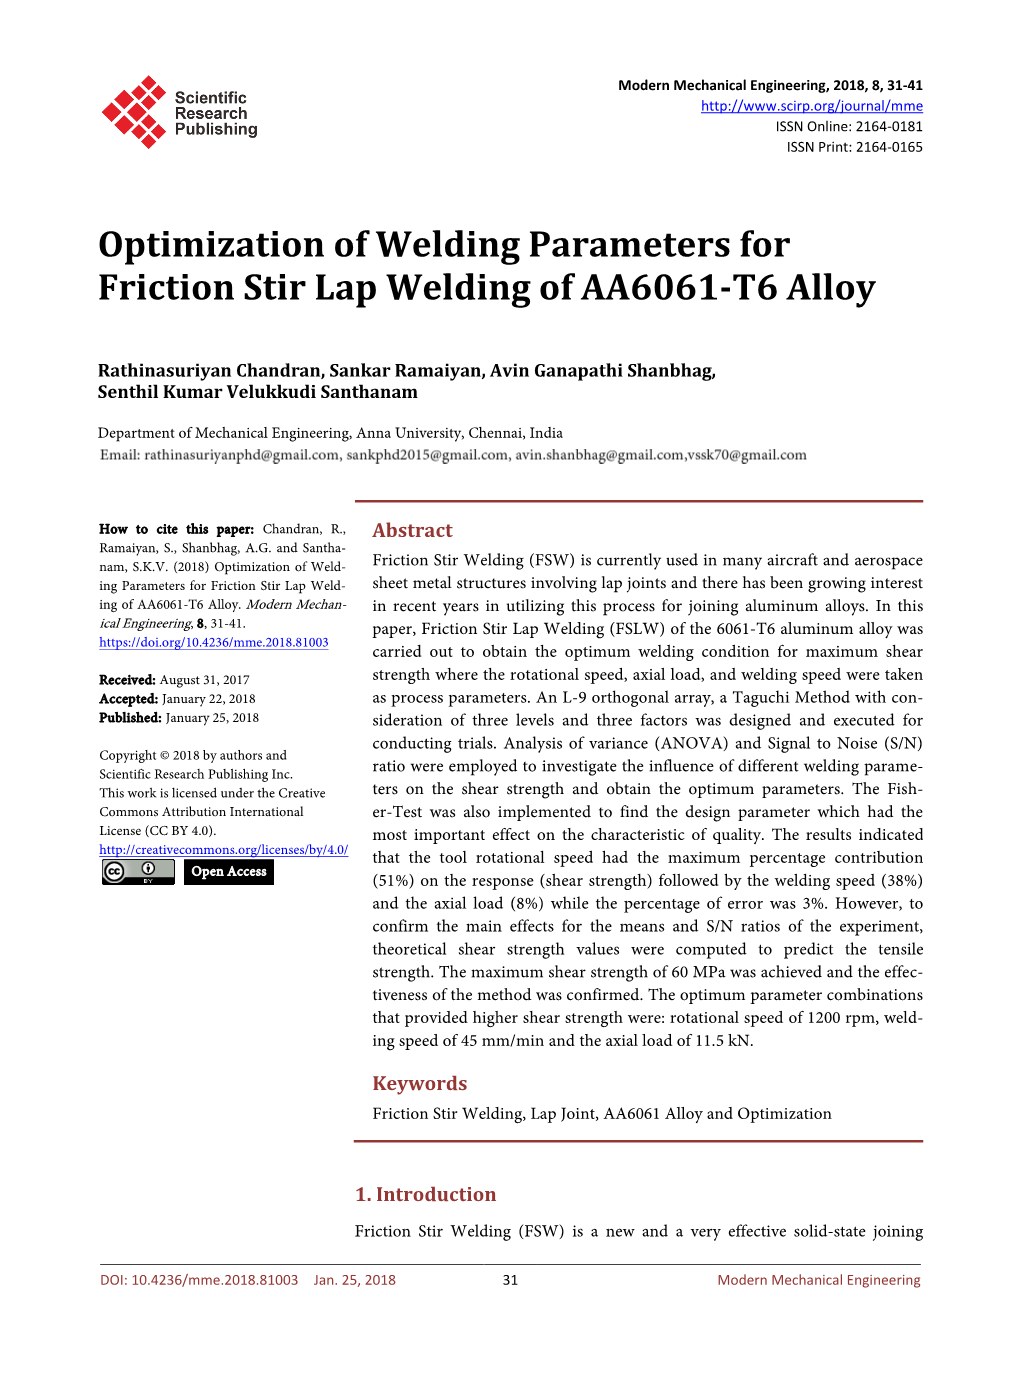 Optimization of Welding Parameters for Friction Stir Lap Welding of AA6061-T6 Alloy